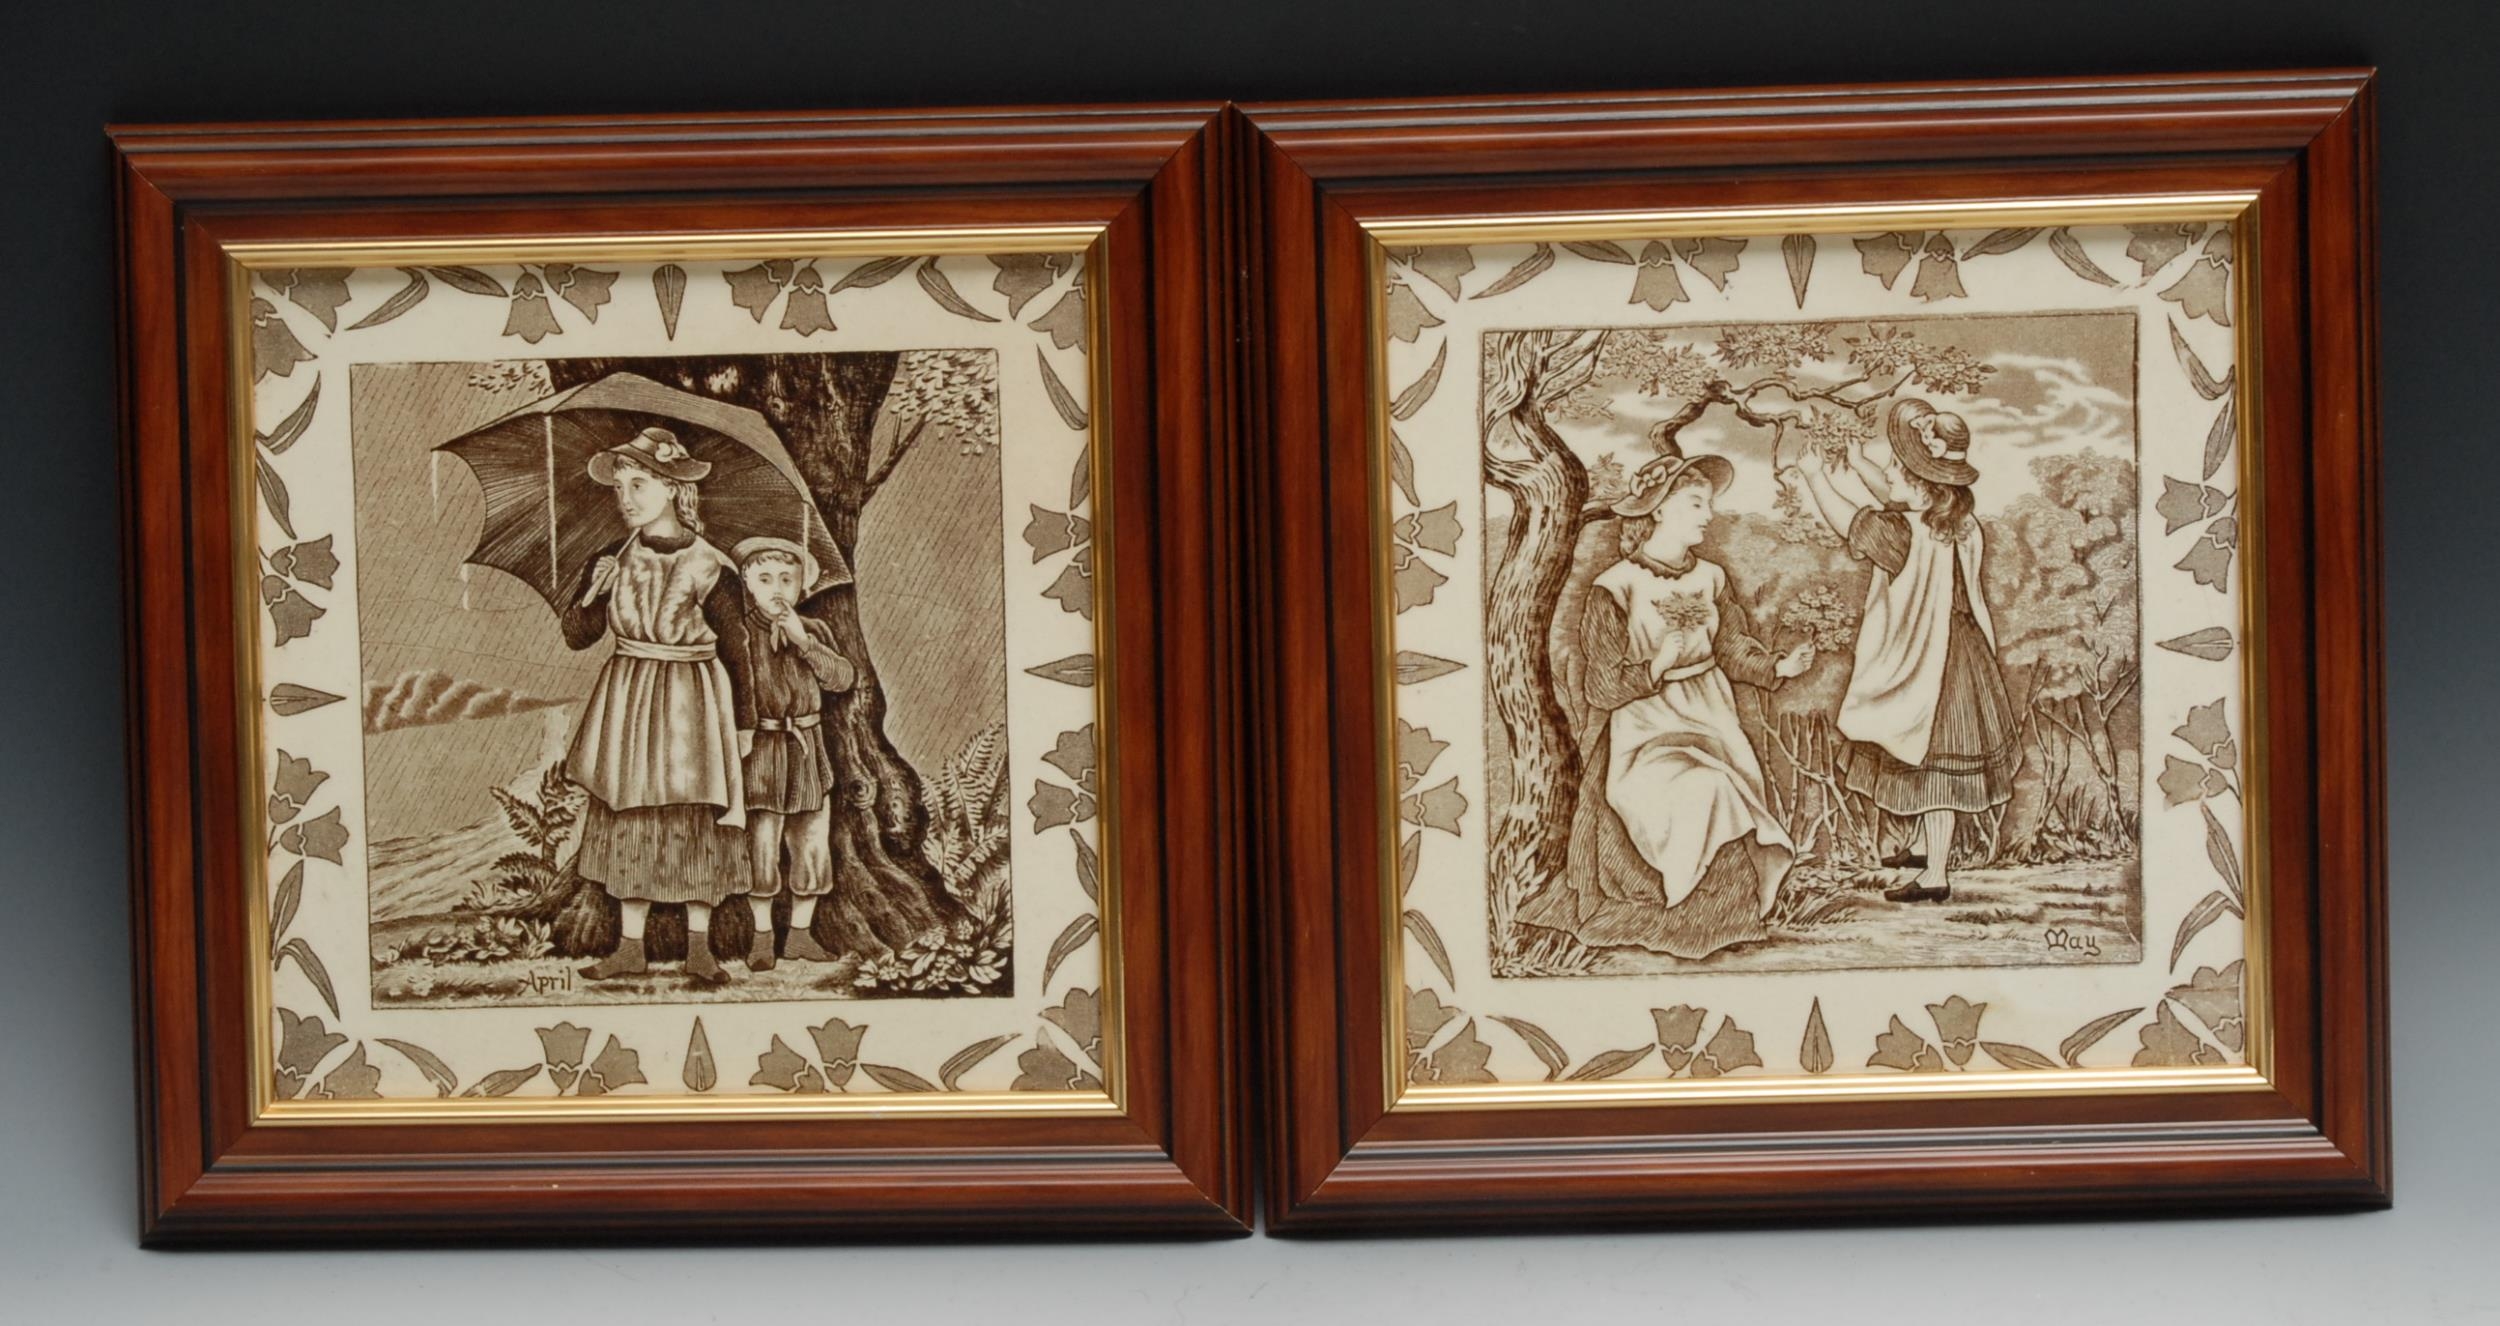 Eight Wedgwood Months tiles designed by Helen J Miles, printed in sepia on a cream ground,